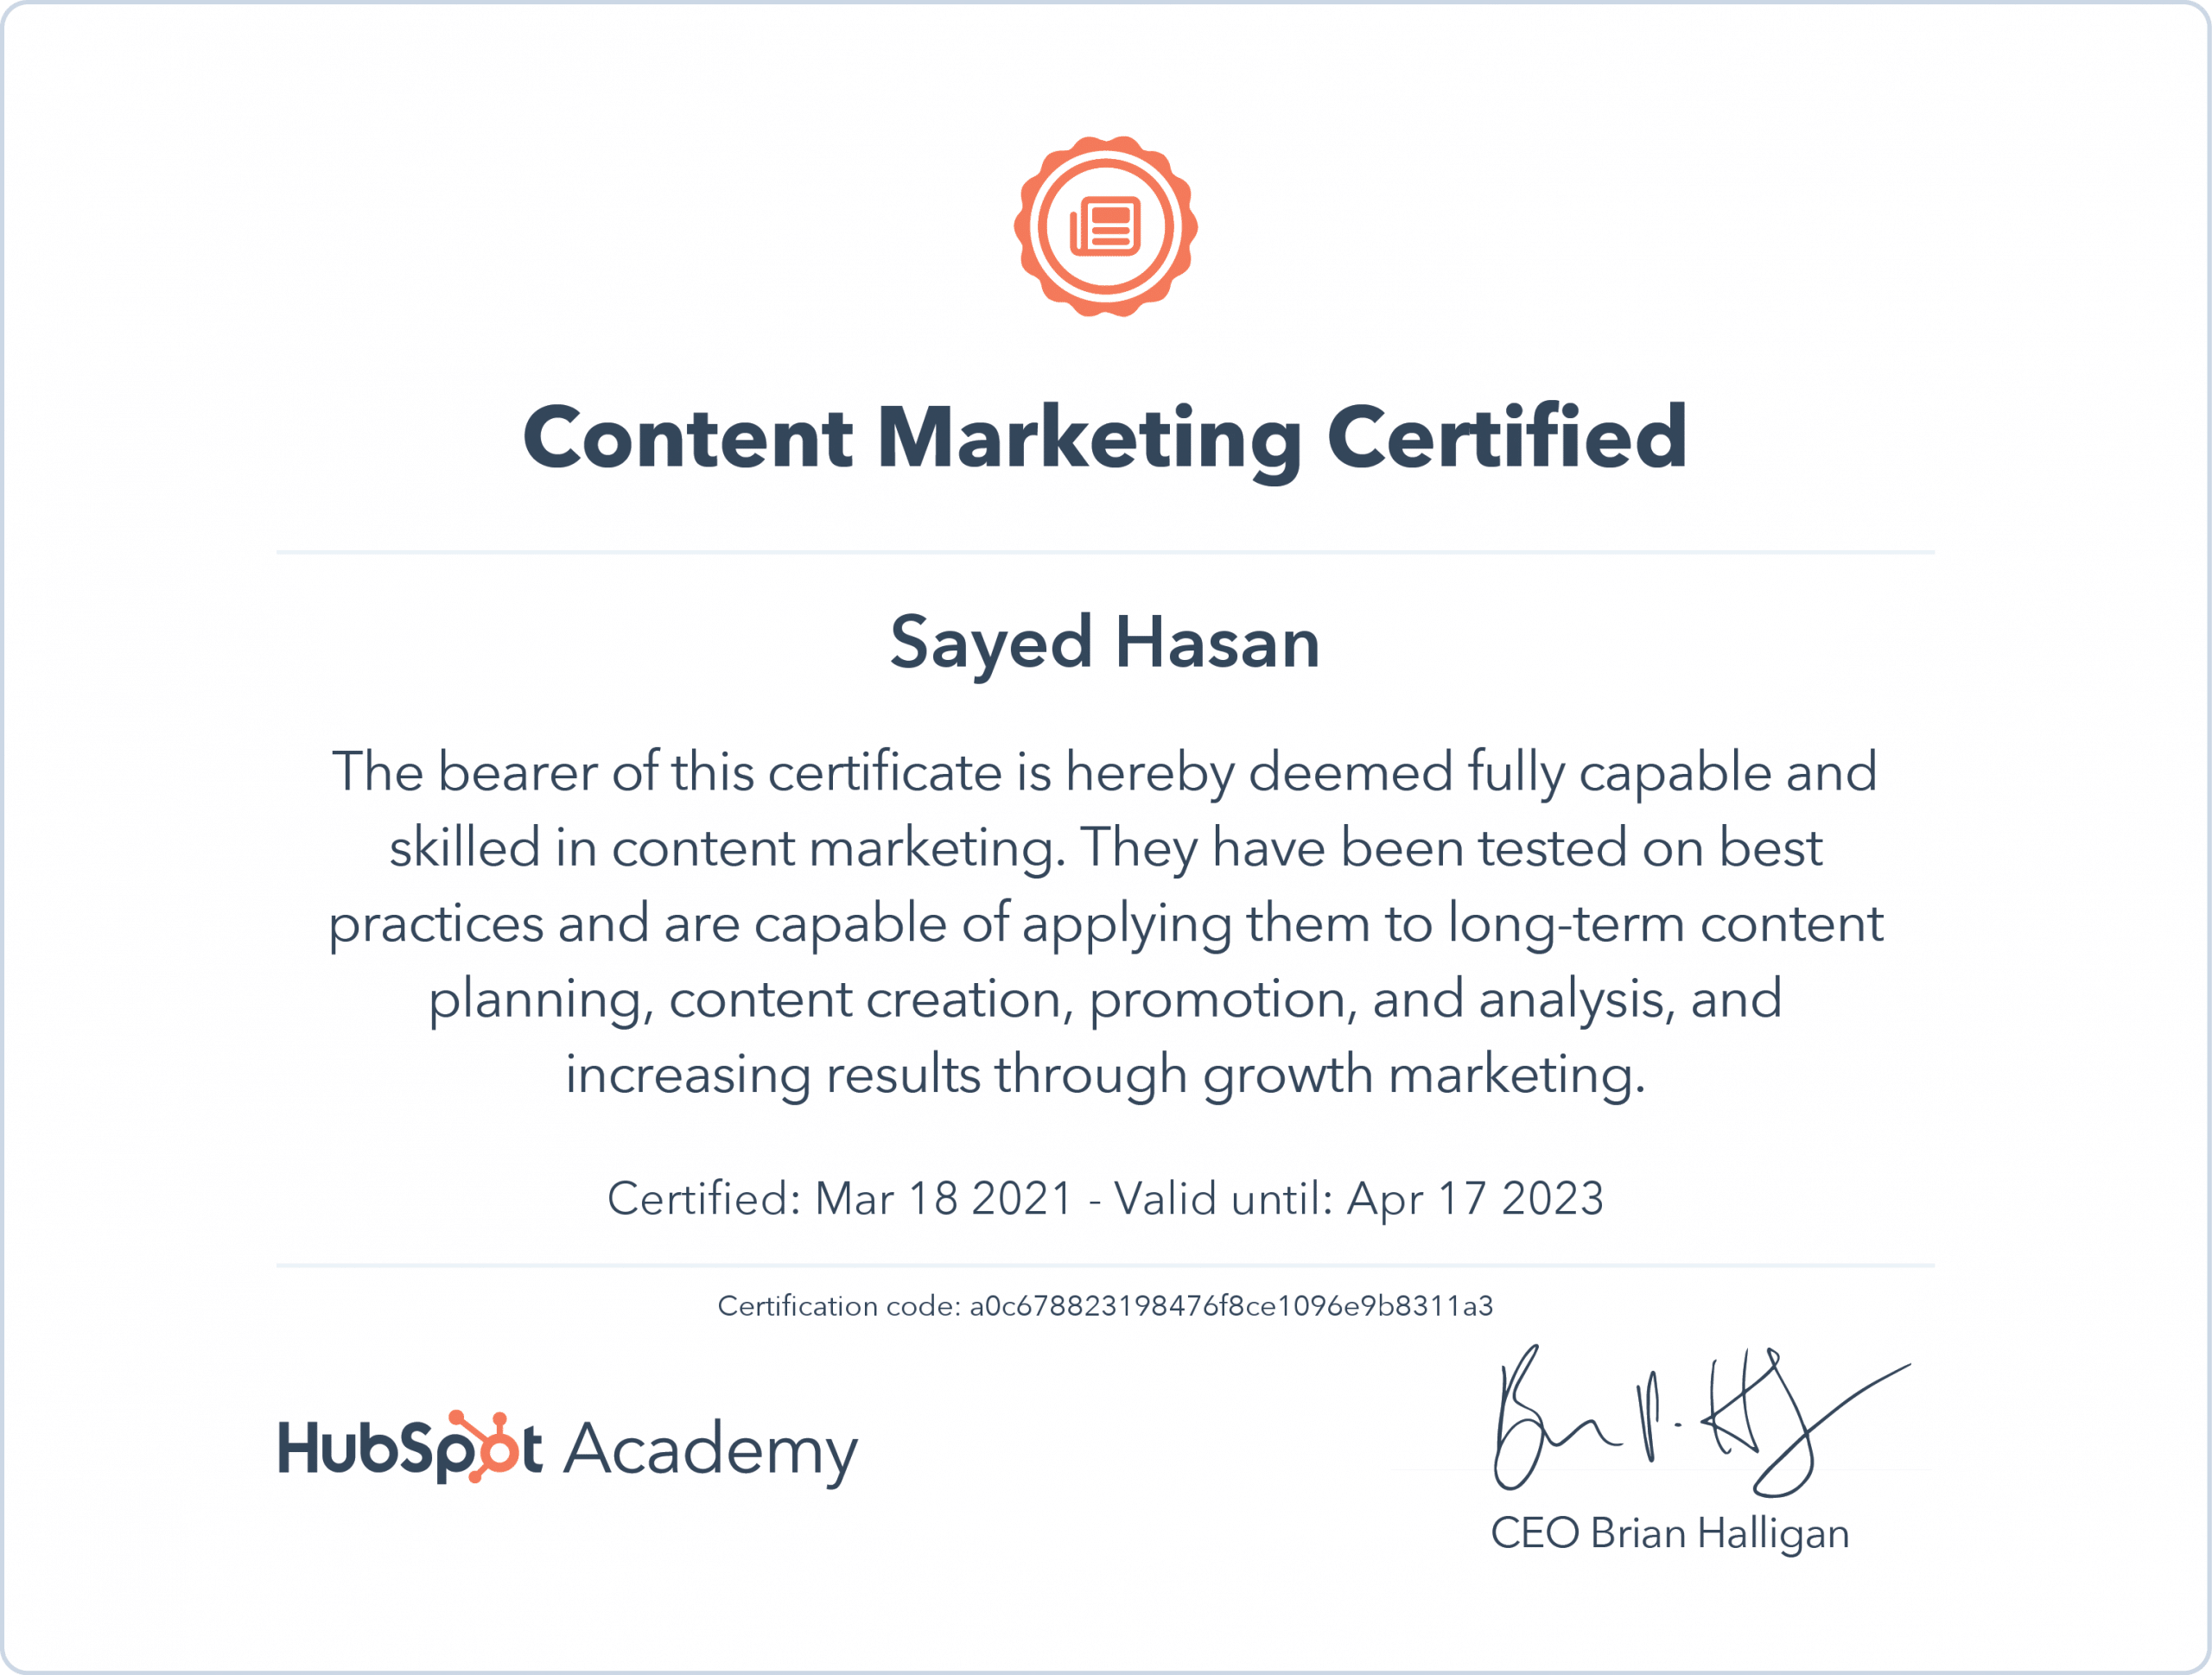 Sayed's certificate of content marketing